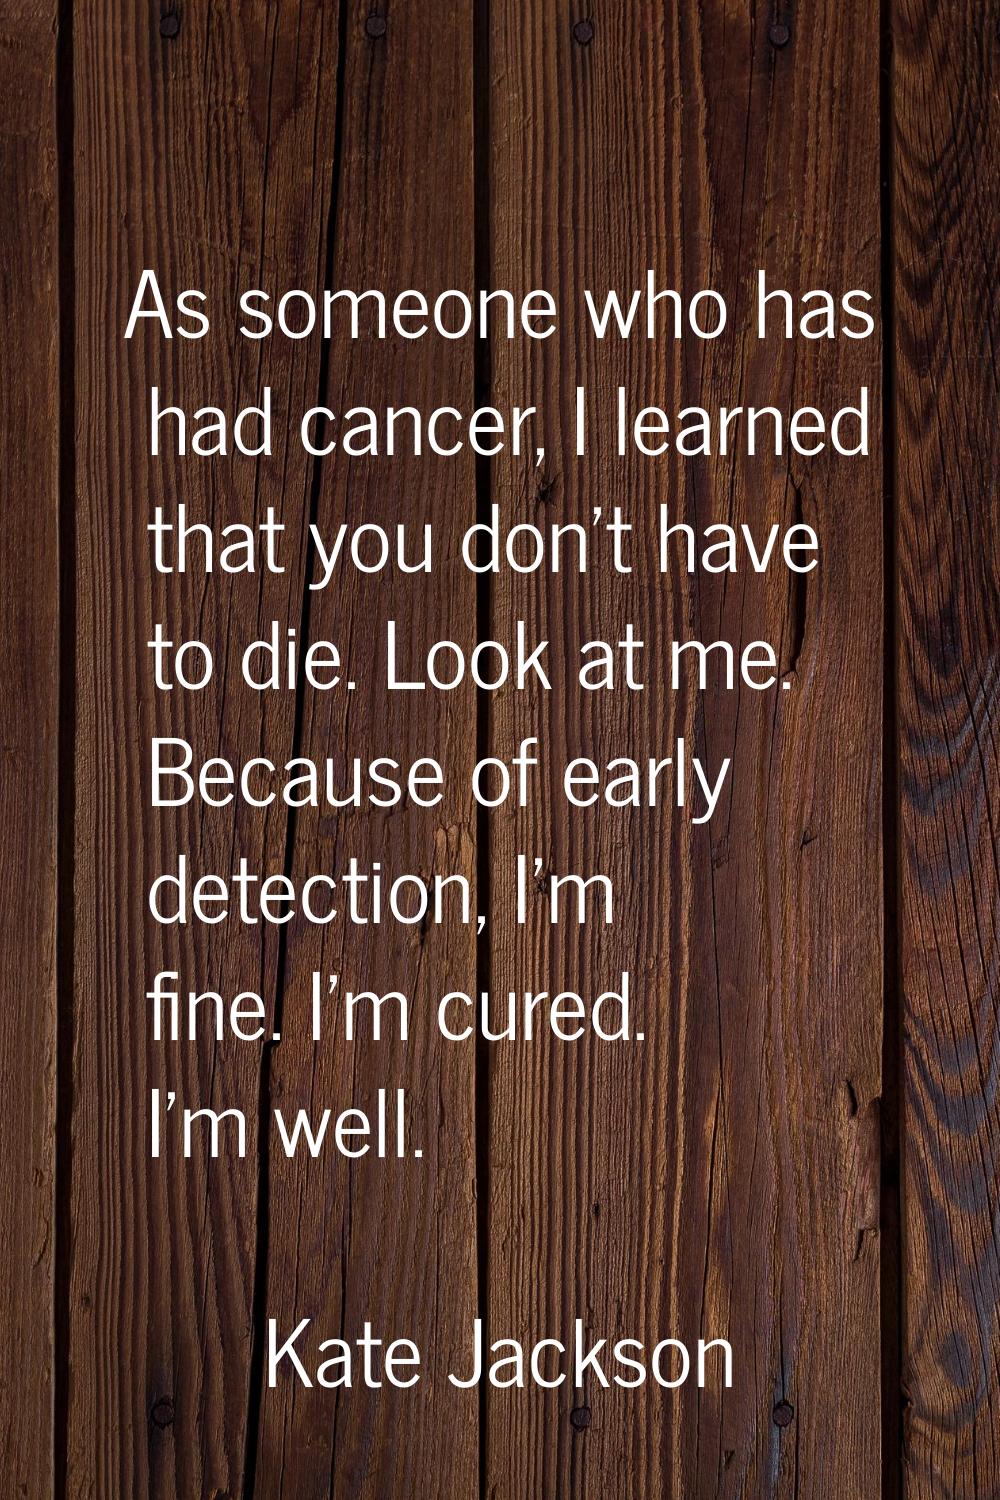 As someone who has had cancer, I learned that you don't have to die. Look at me. Because of early d